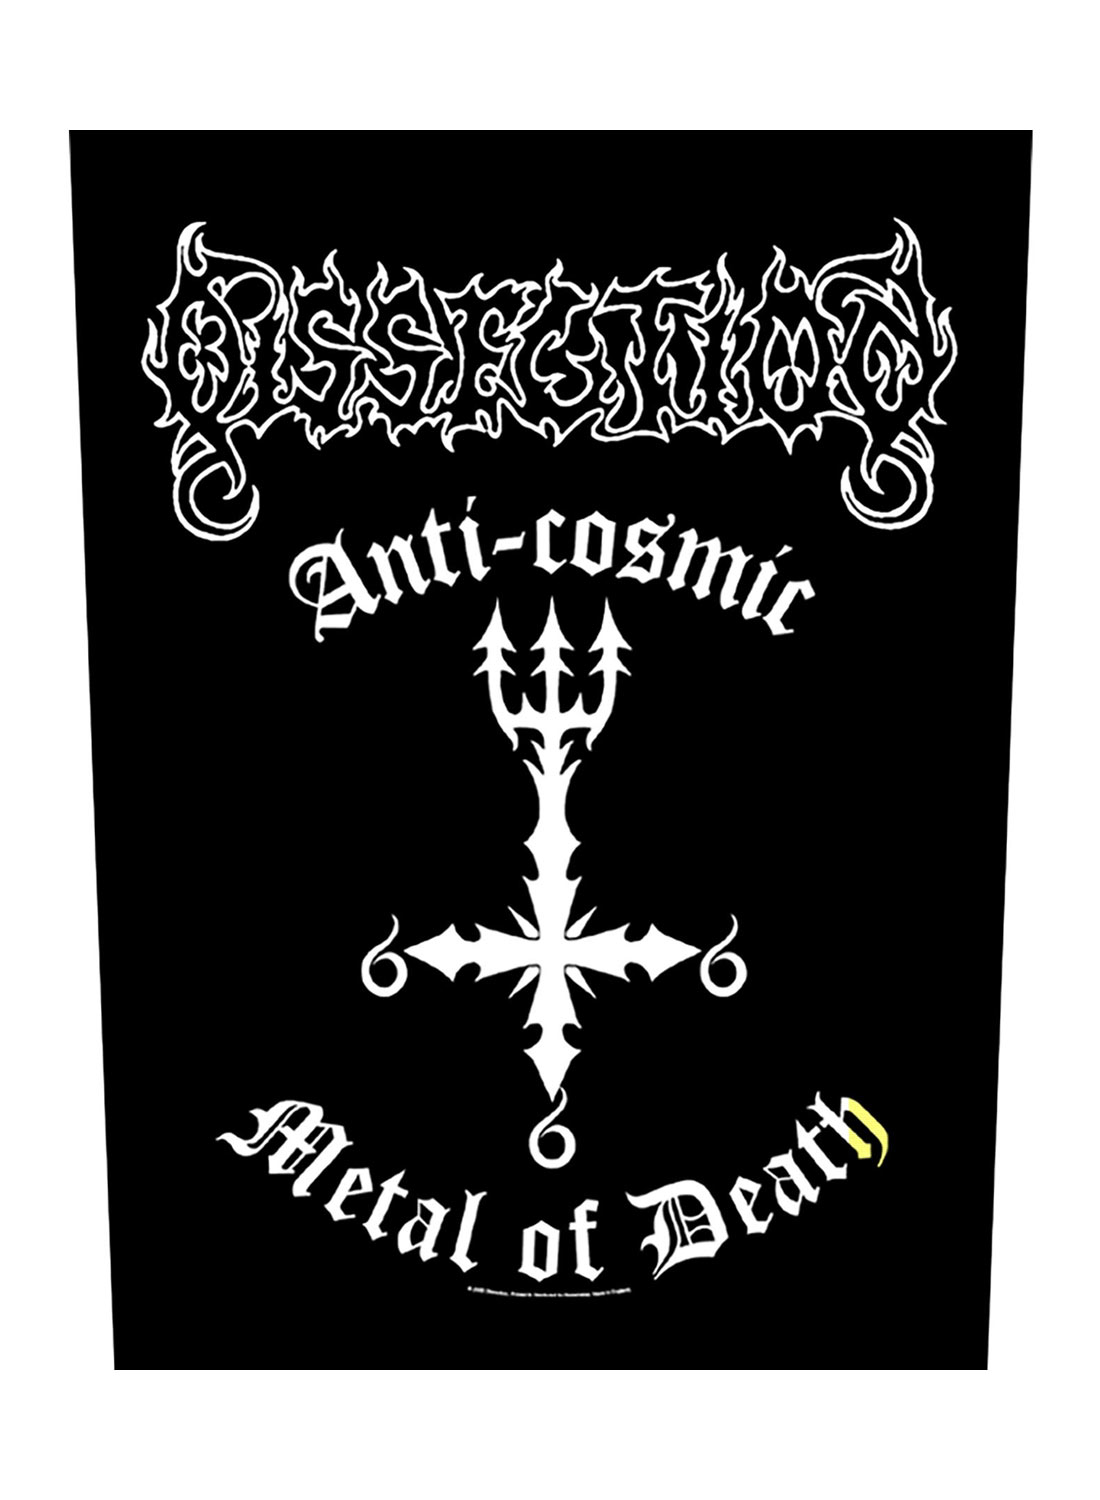 Dissection Anti-Cosmic Back Patch